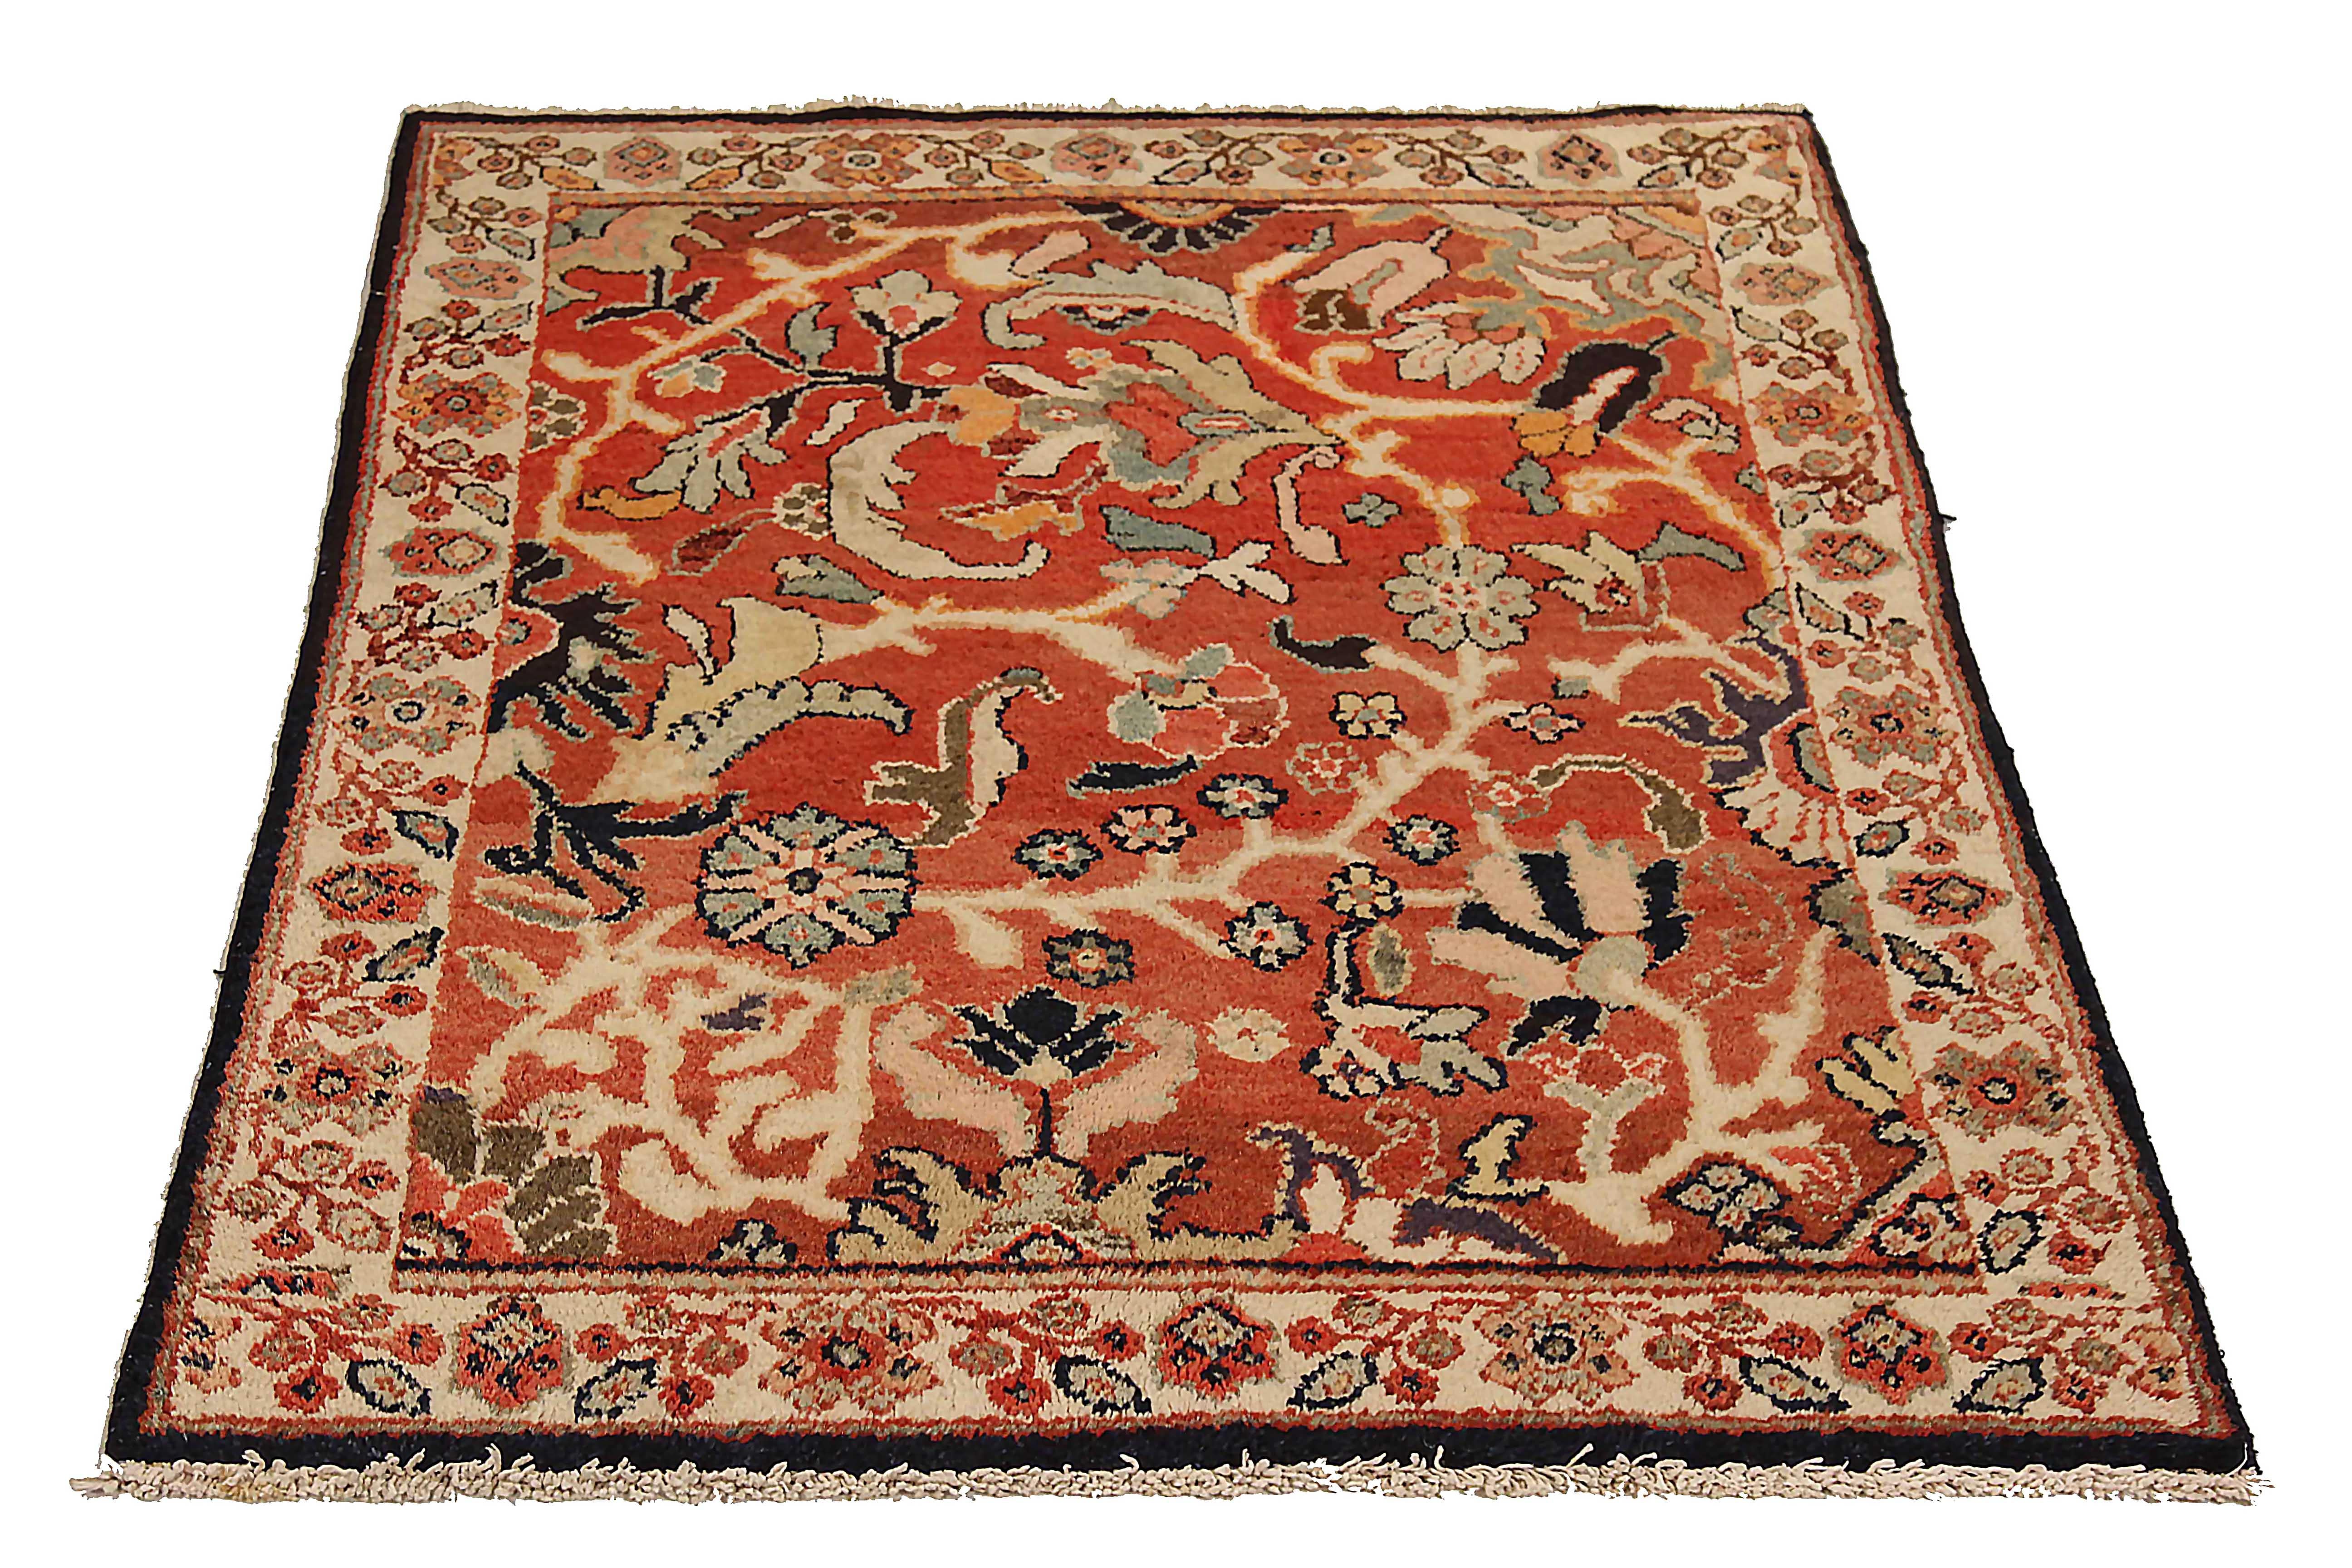 Antique Persian area rug handwoven from the finest sheep’s wool. It’s colored with all-natural vegetable dyes that are safe for humans and pets. It’s a traditional Mahal design handwoven by expert artisans. It’s a lovely area rug that can be